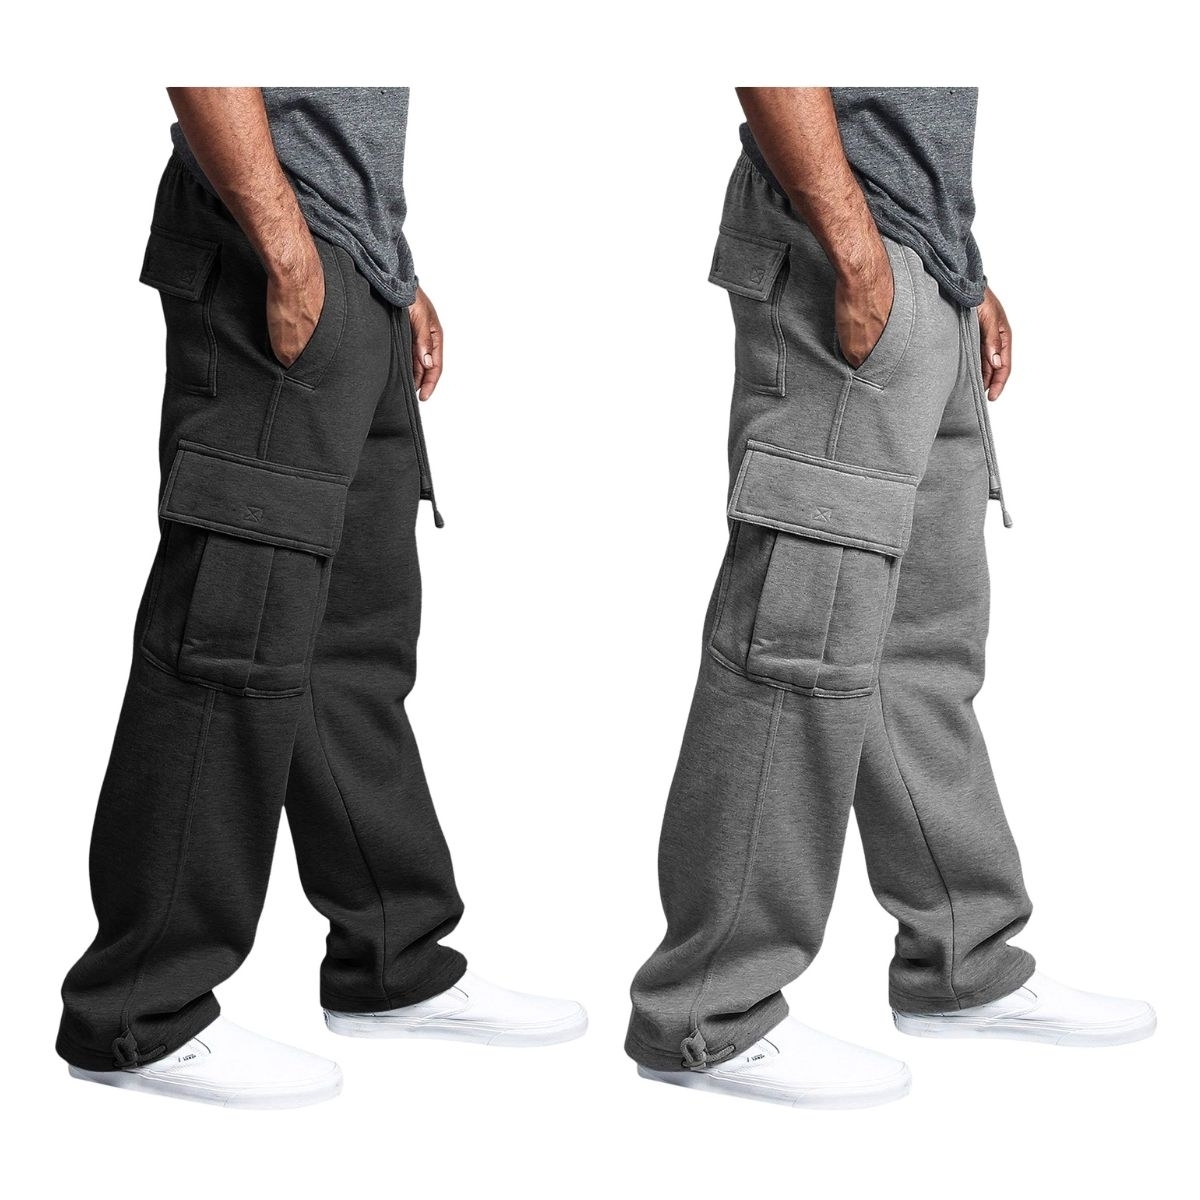 2-Pack: Men's Casual Solid Fleece Lined Cargo Jogger Soft Sweatpants With Pockets - Black&charcoal, Medium